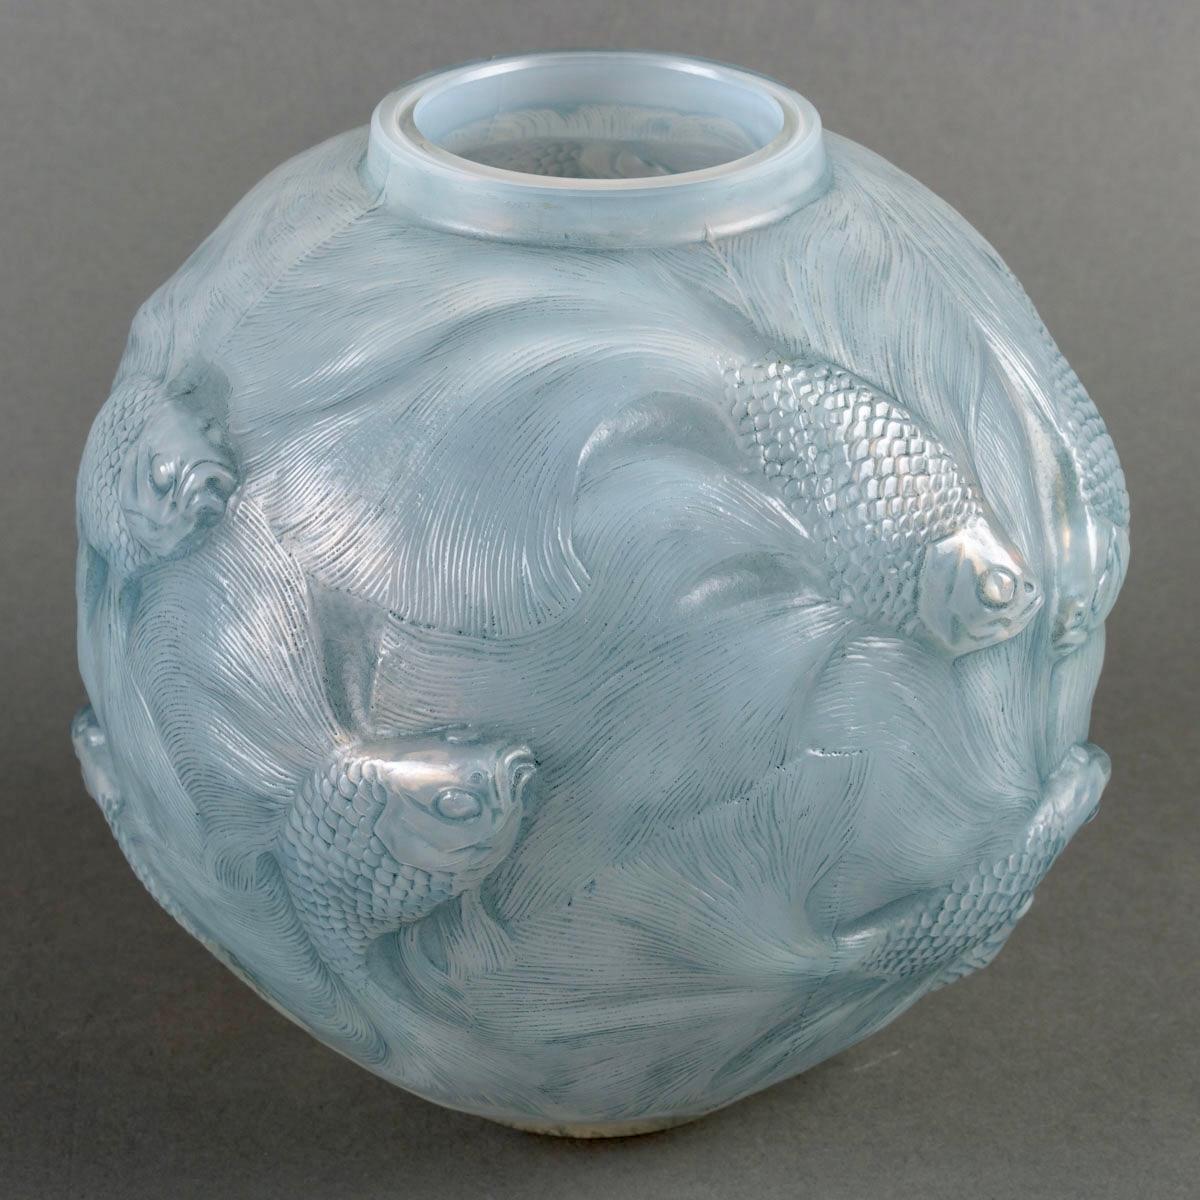 Art Deco 1924 Rene Lalique Vase Formose Cased Opalescent Glass with Blue Patina